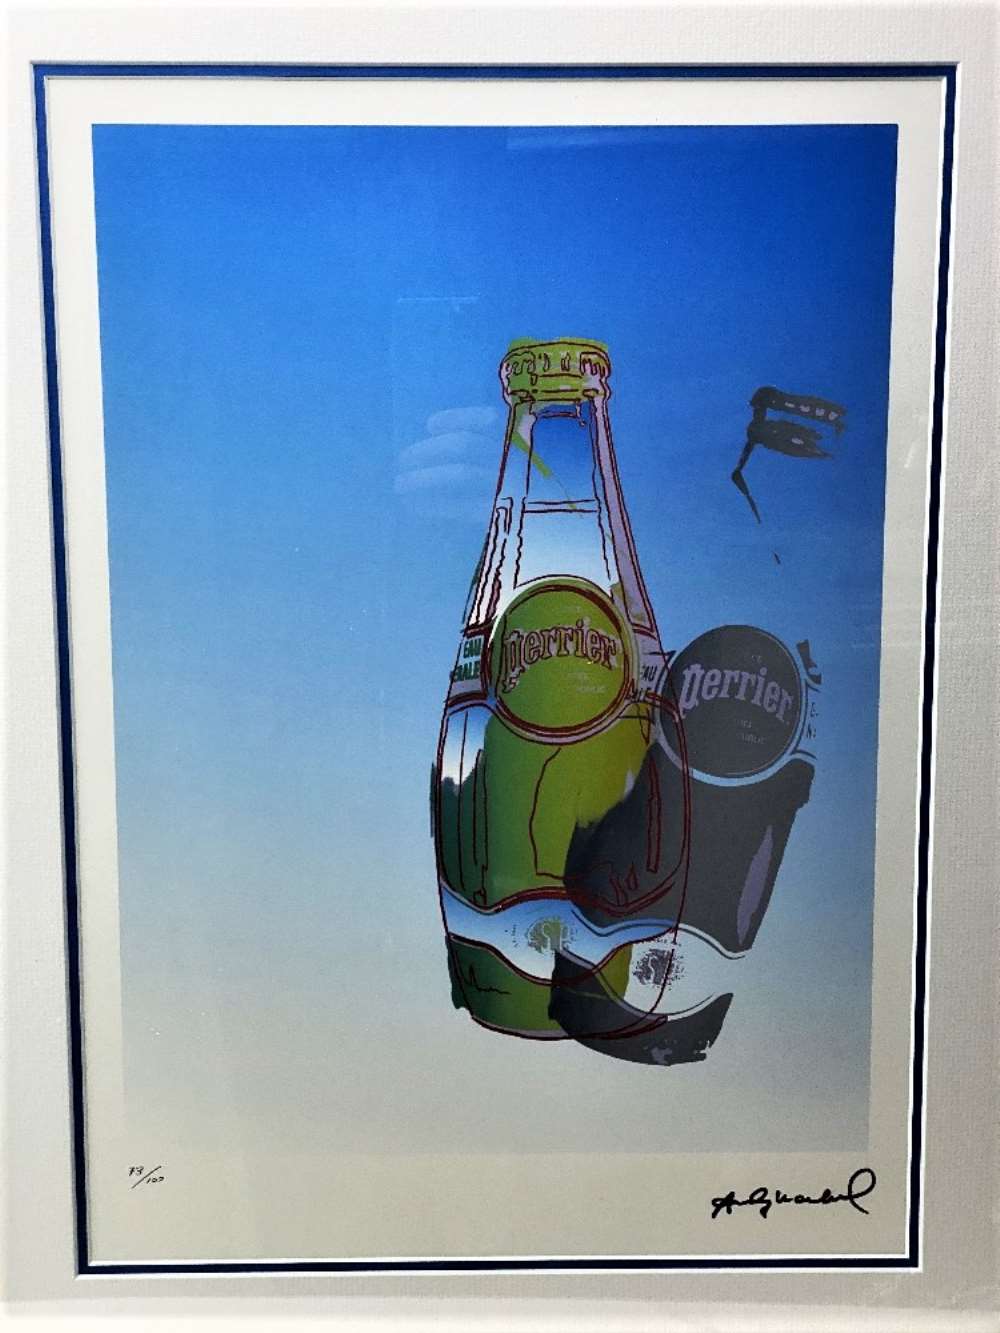 Andy Warhol (1928-1987) “Perrier” Leo Castelli- New York Numbered Ltd Edition of 100 Lithograph-#73, - Image 2 of 6